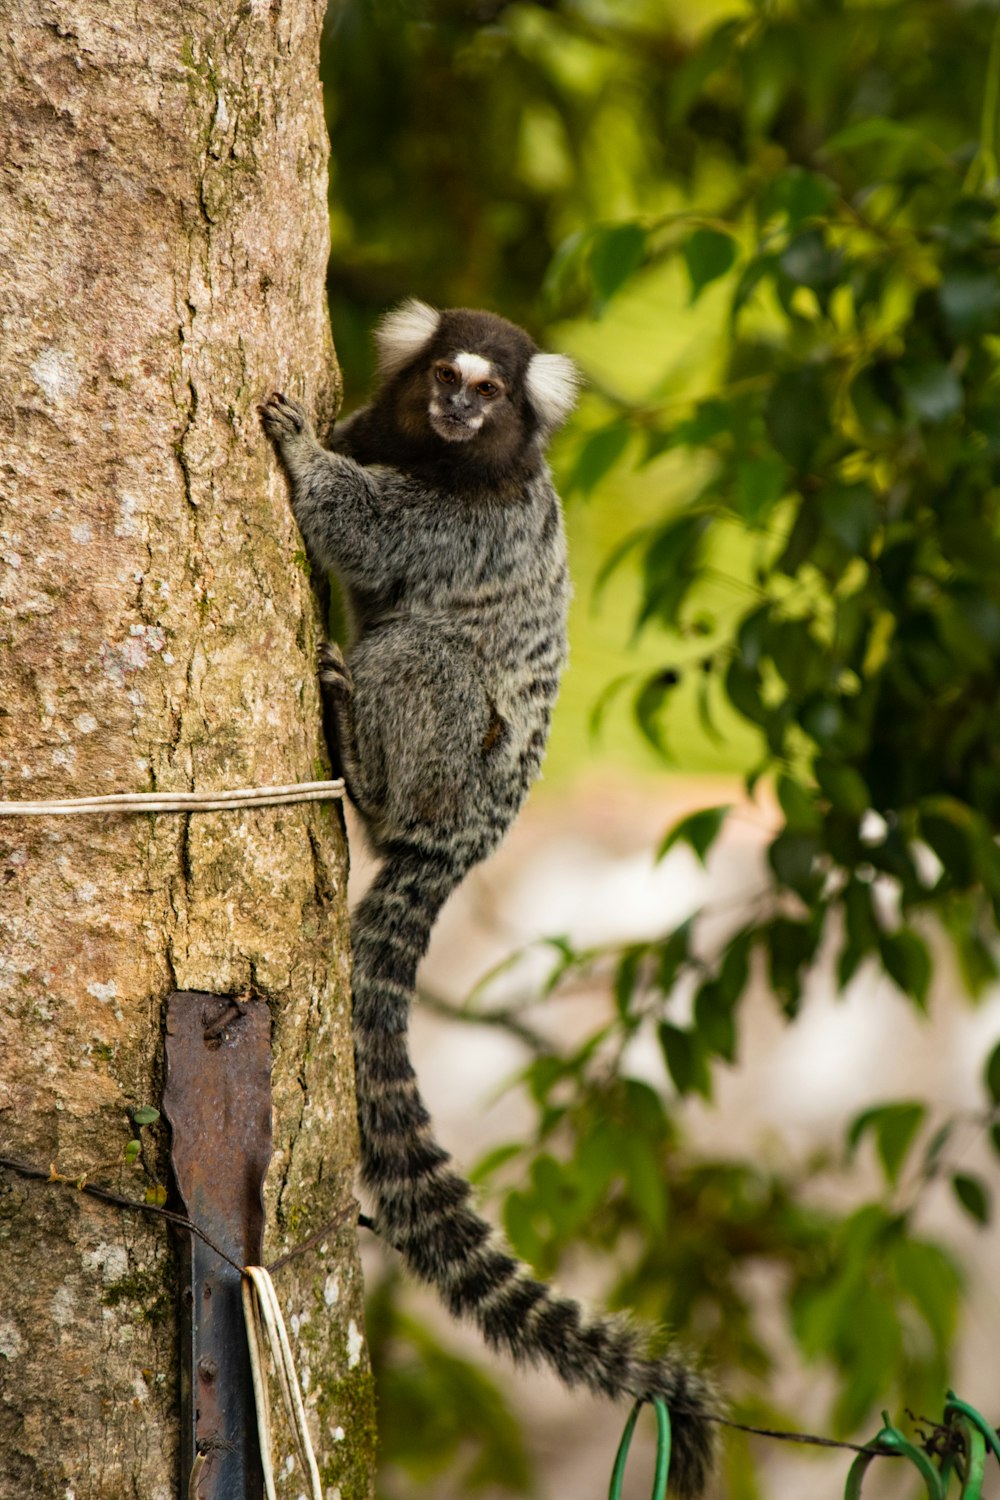 a small monkey climbing up the side of a tree